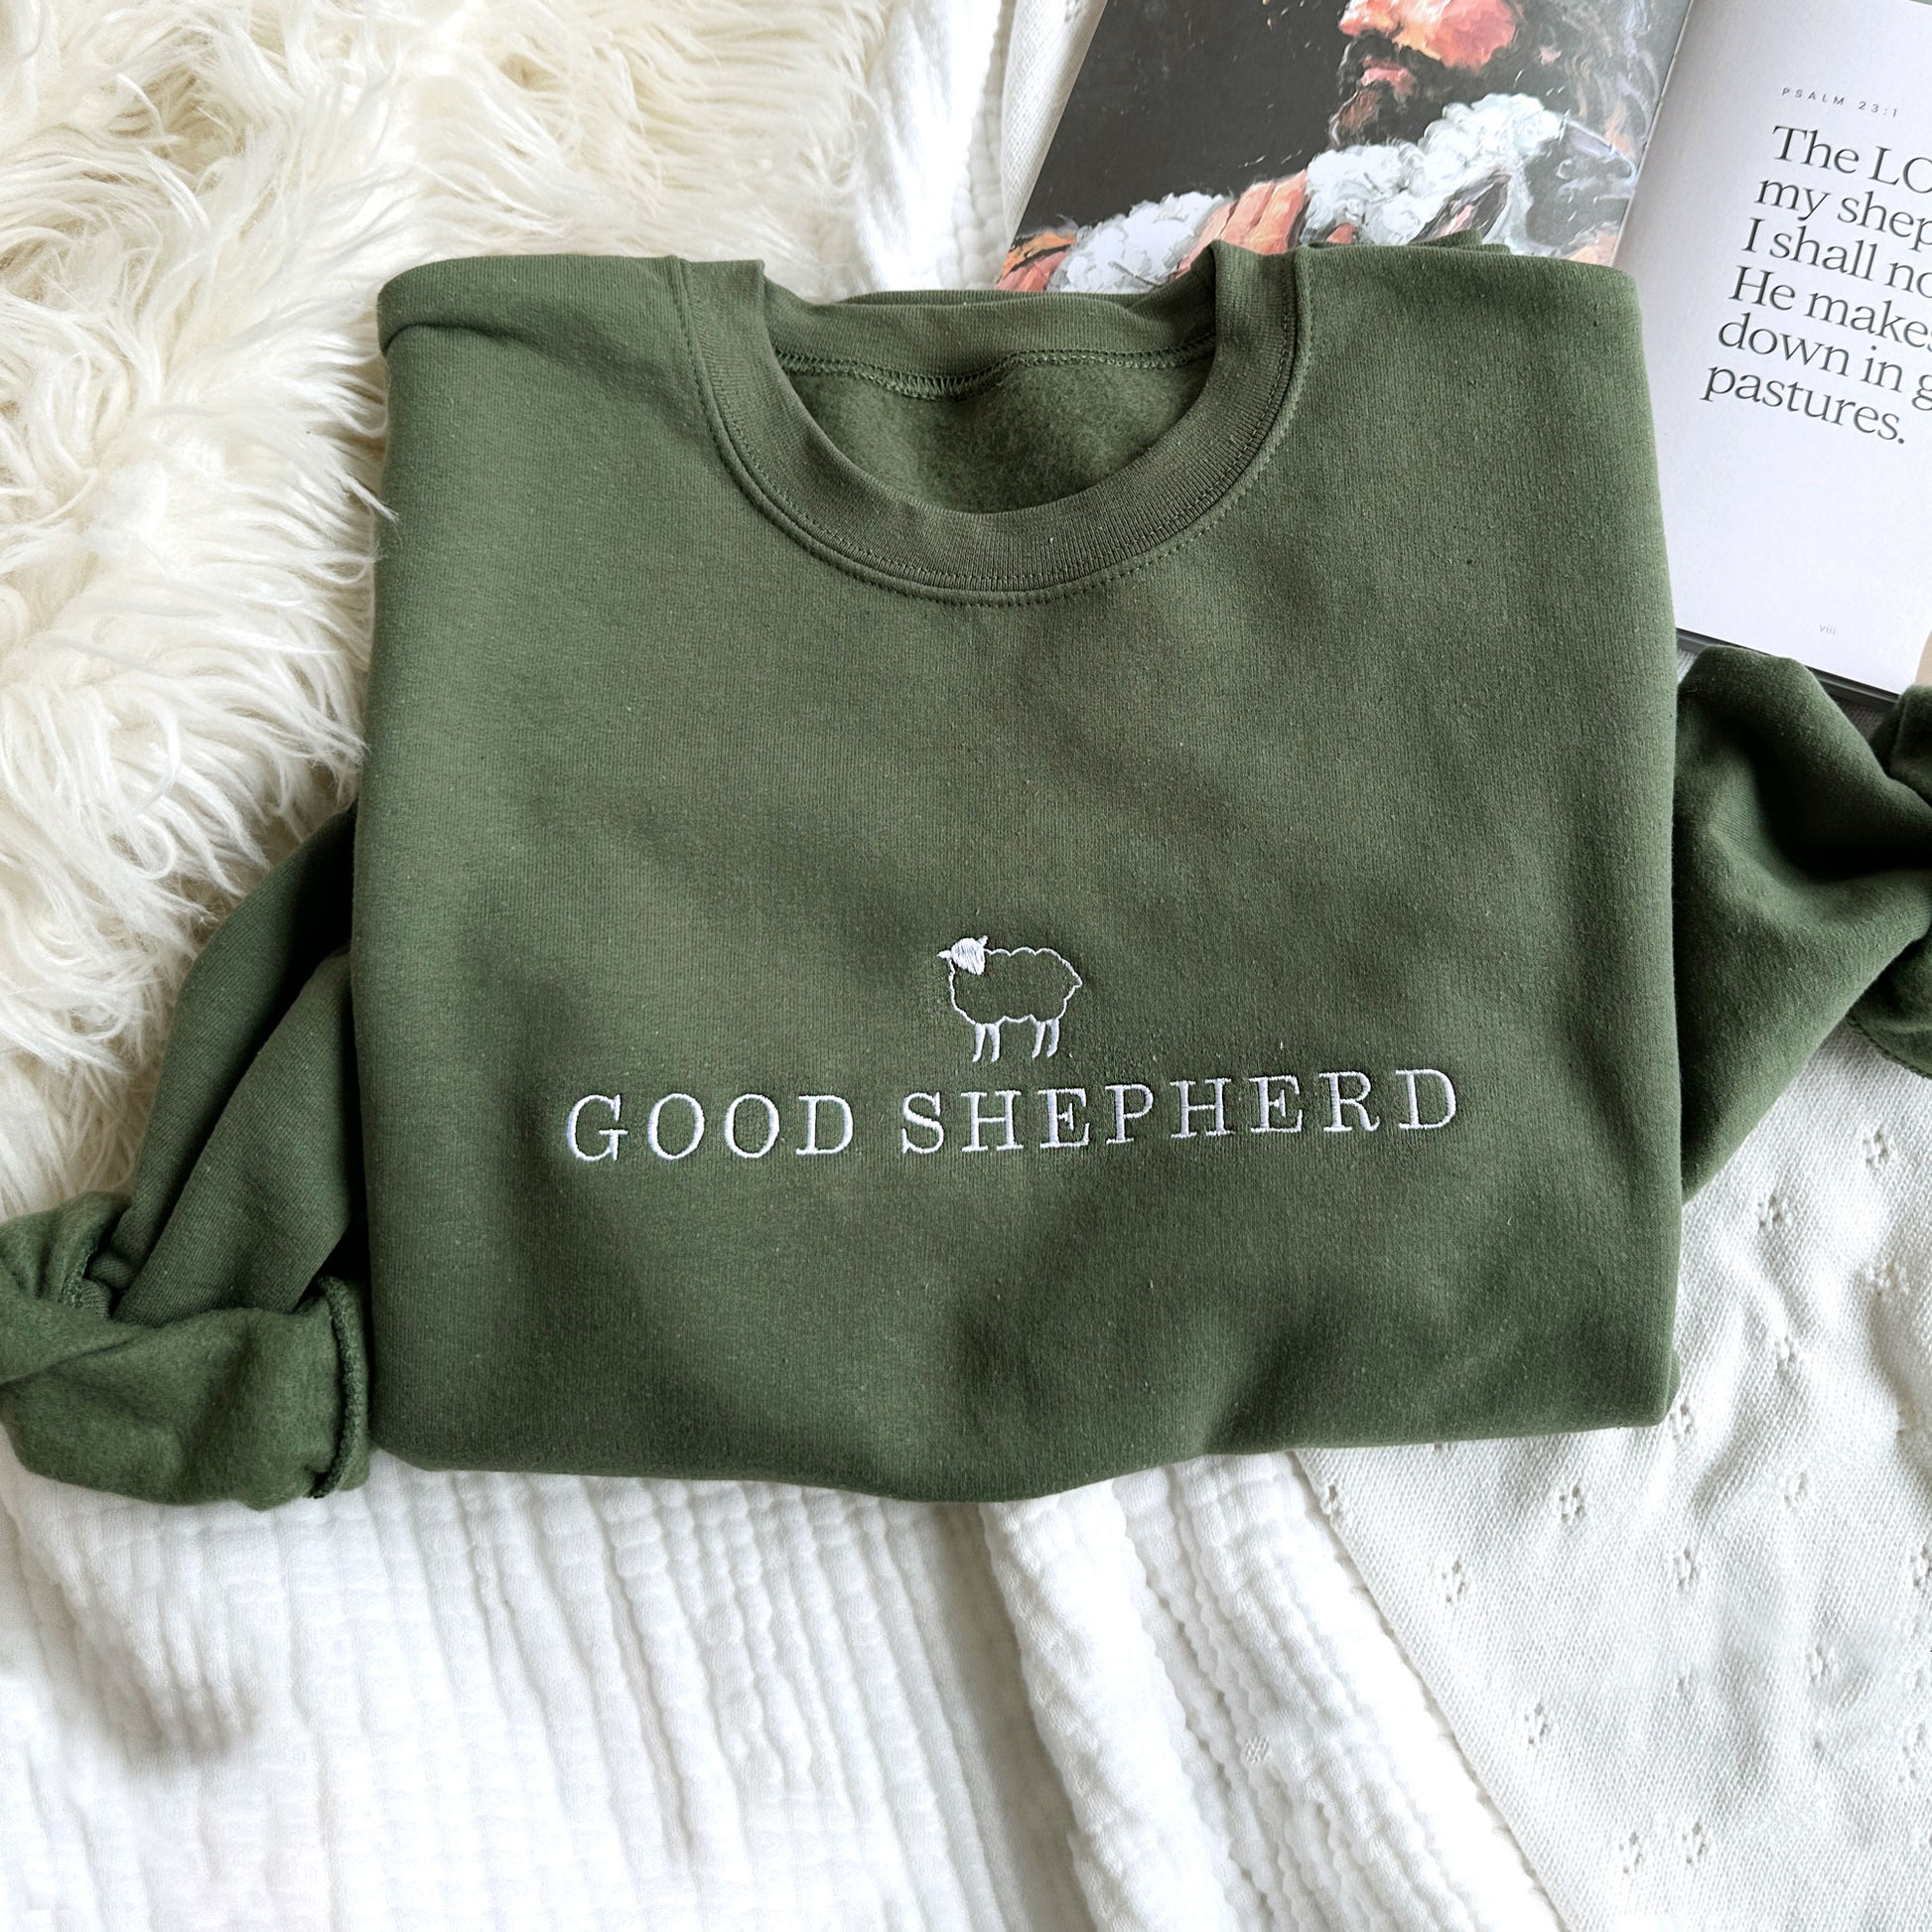 Olive green crewneck swatshirt with good shepherd and little sheep design embroidered across the chest in white